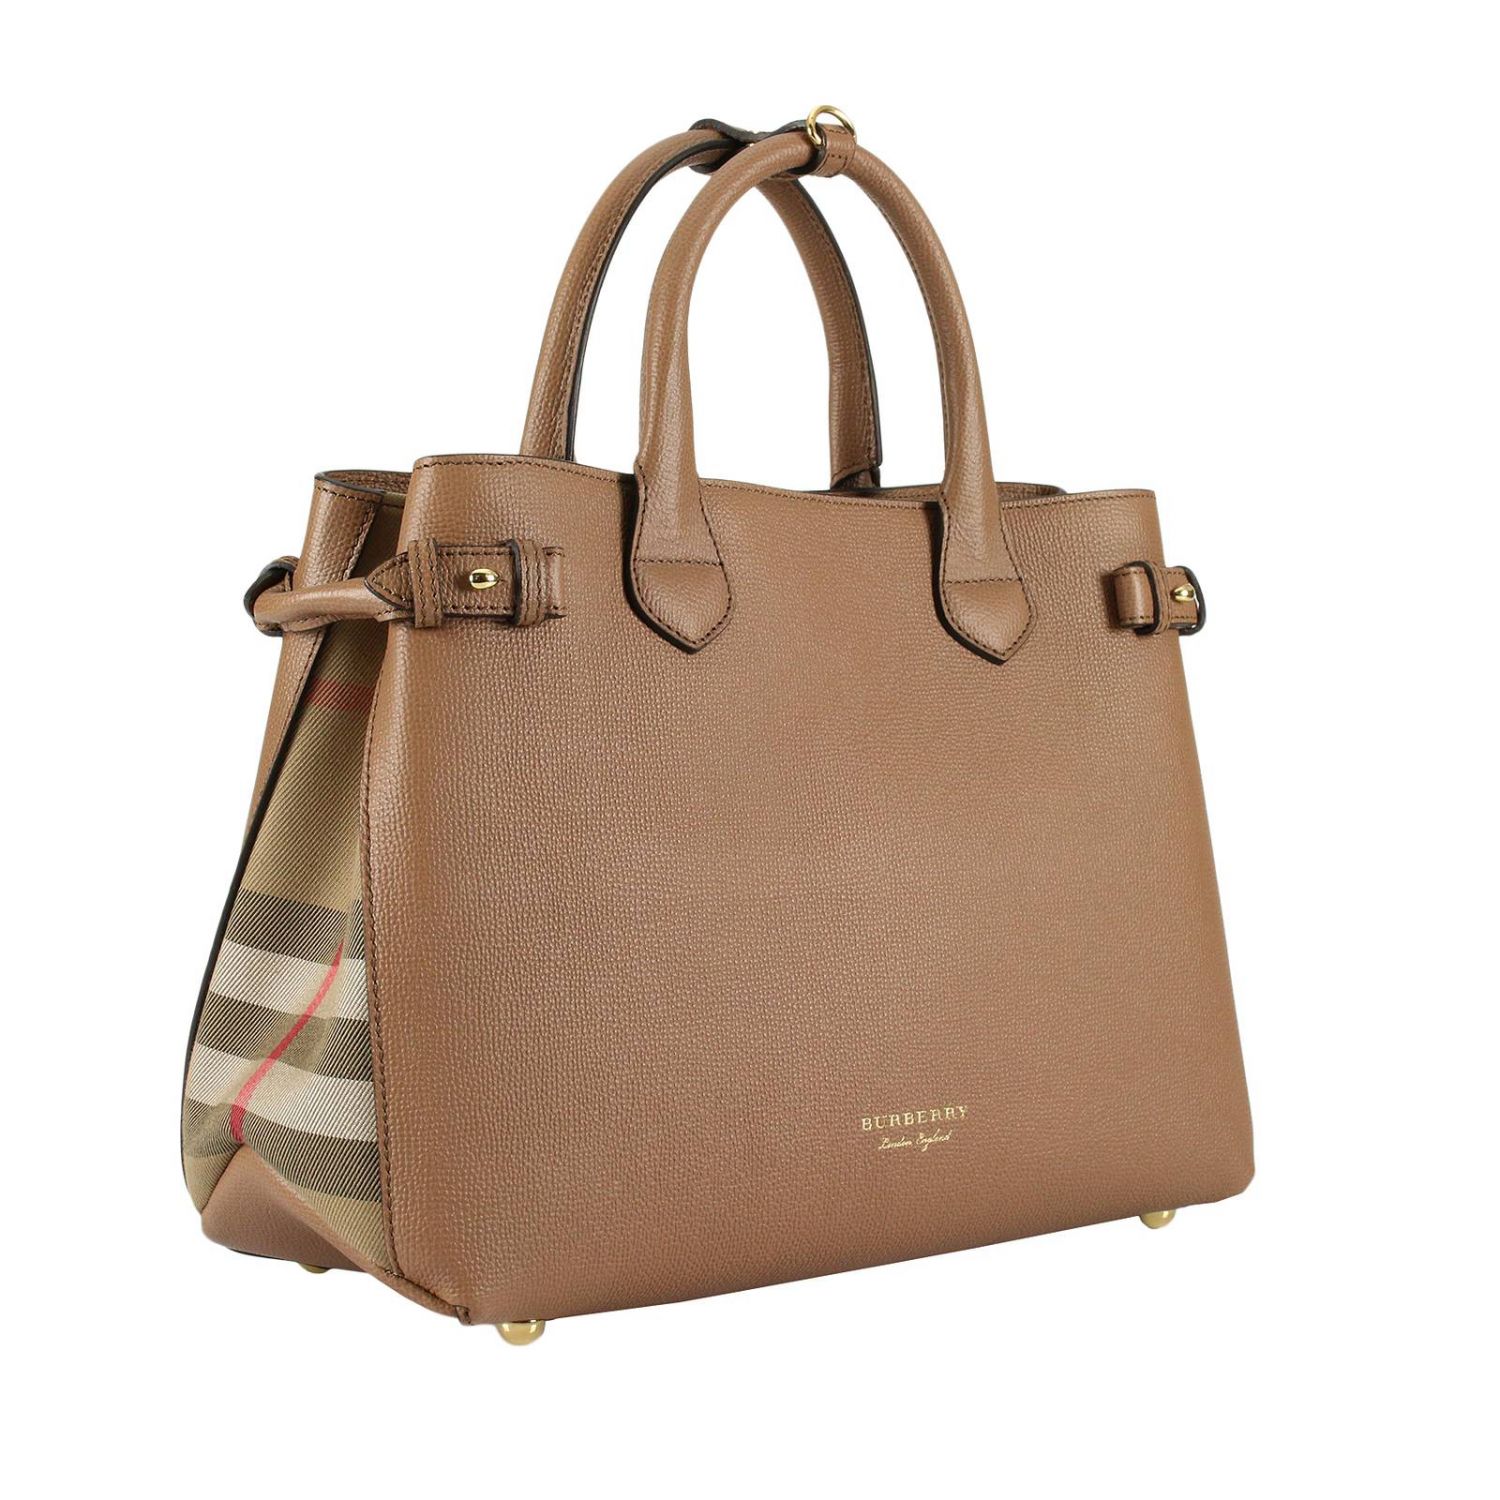 Designer Tote Bags | Canvas & Leather Tote Bags | Burberry® Official |  Canvas leather tote bag, Tote bag leather, Bags